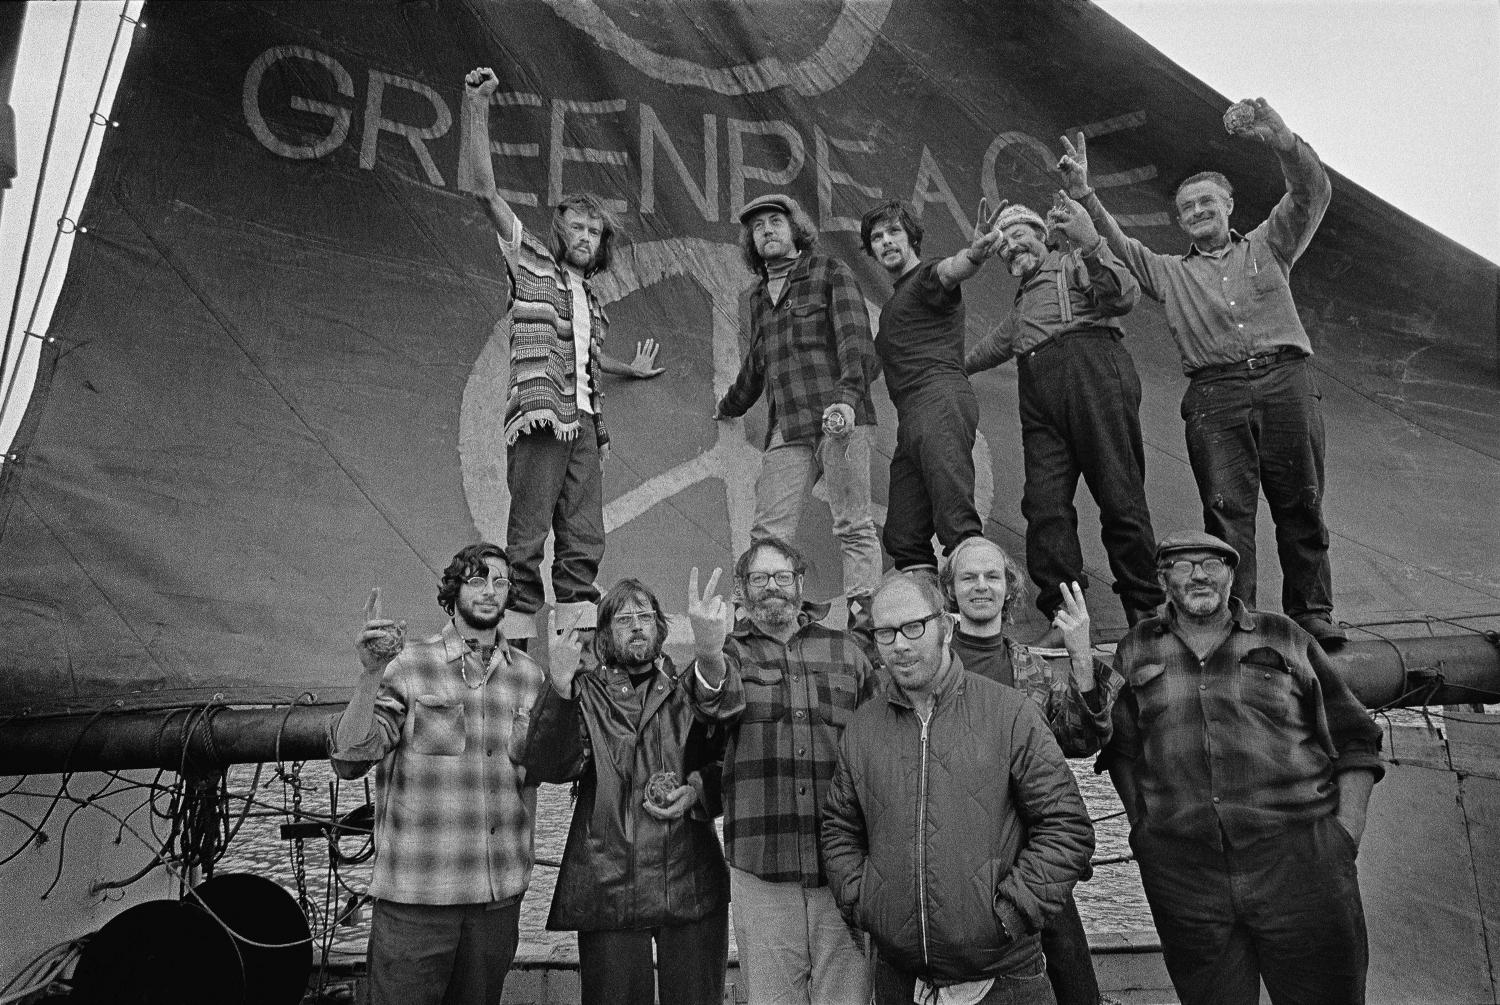 The crew of the Greenpeace in 1971